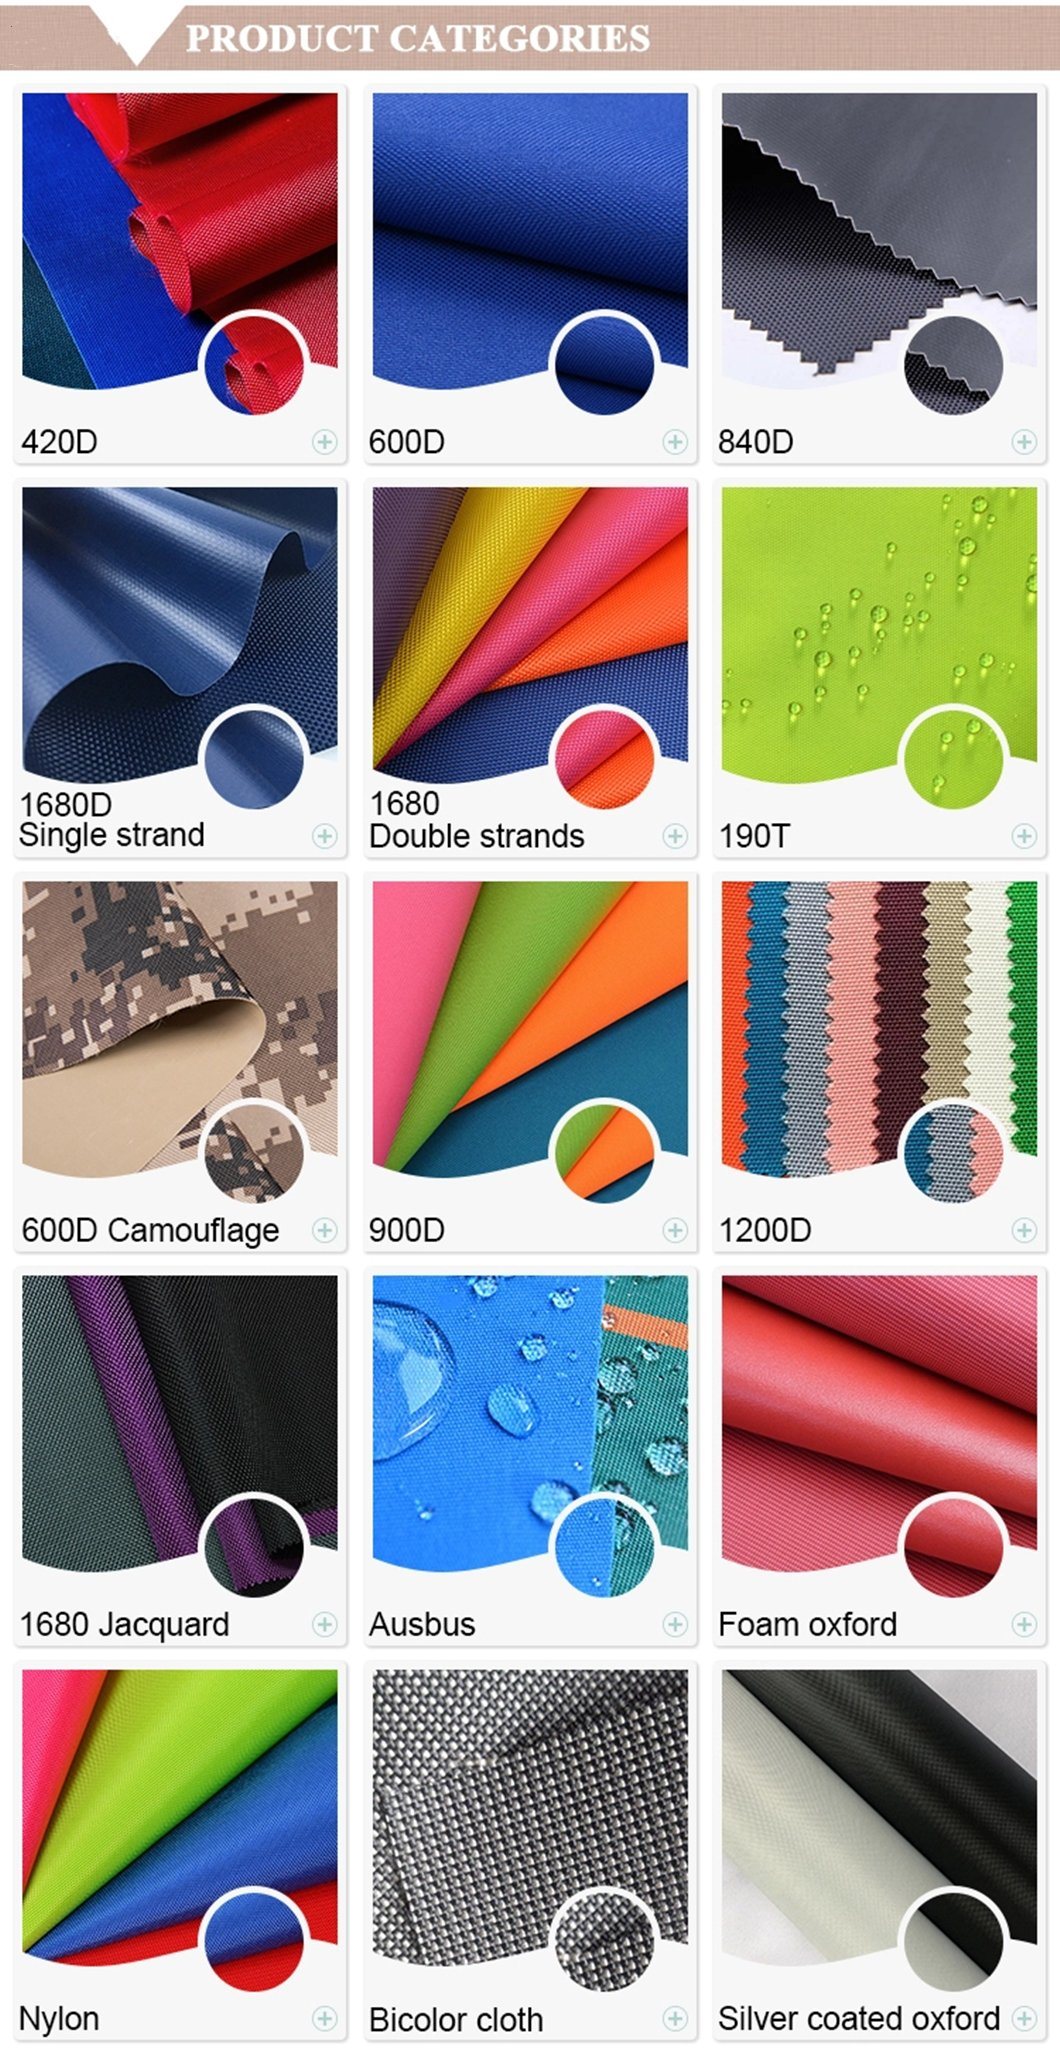 300d Polyester Oxford with PU Coated Fabric/Tent Fabric/Waterproof Flame Retardant Fabric